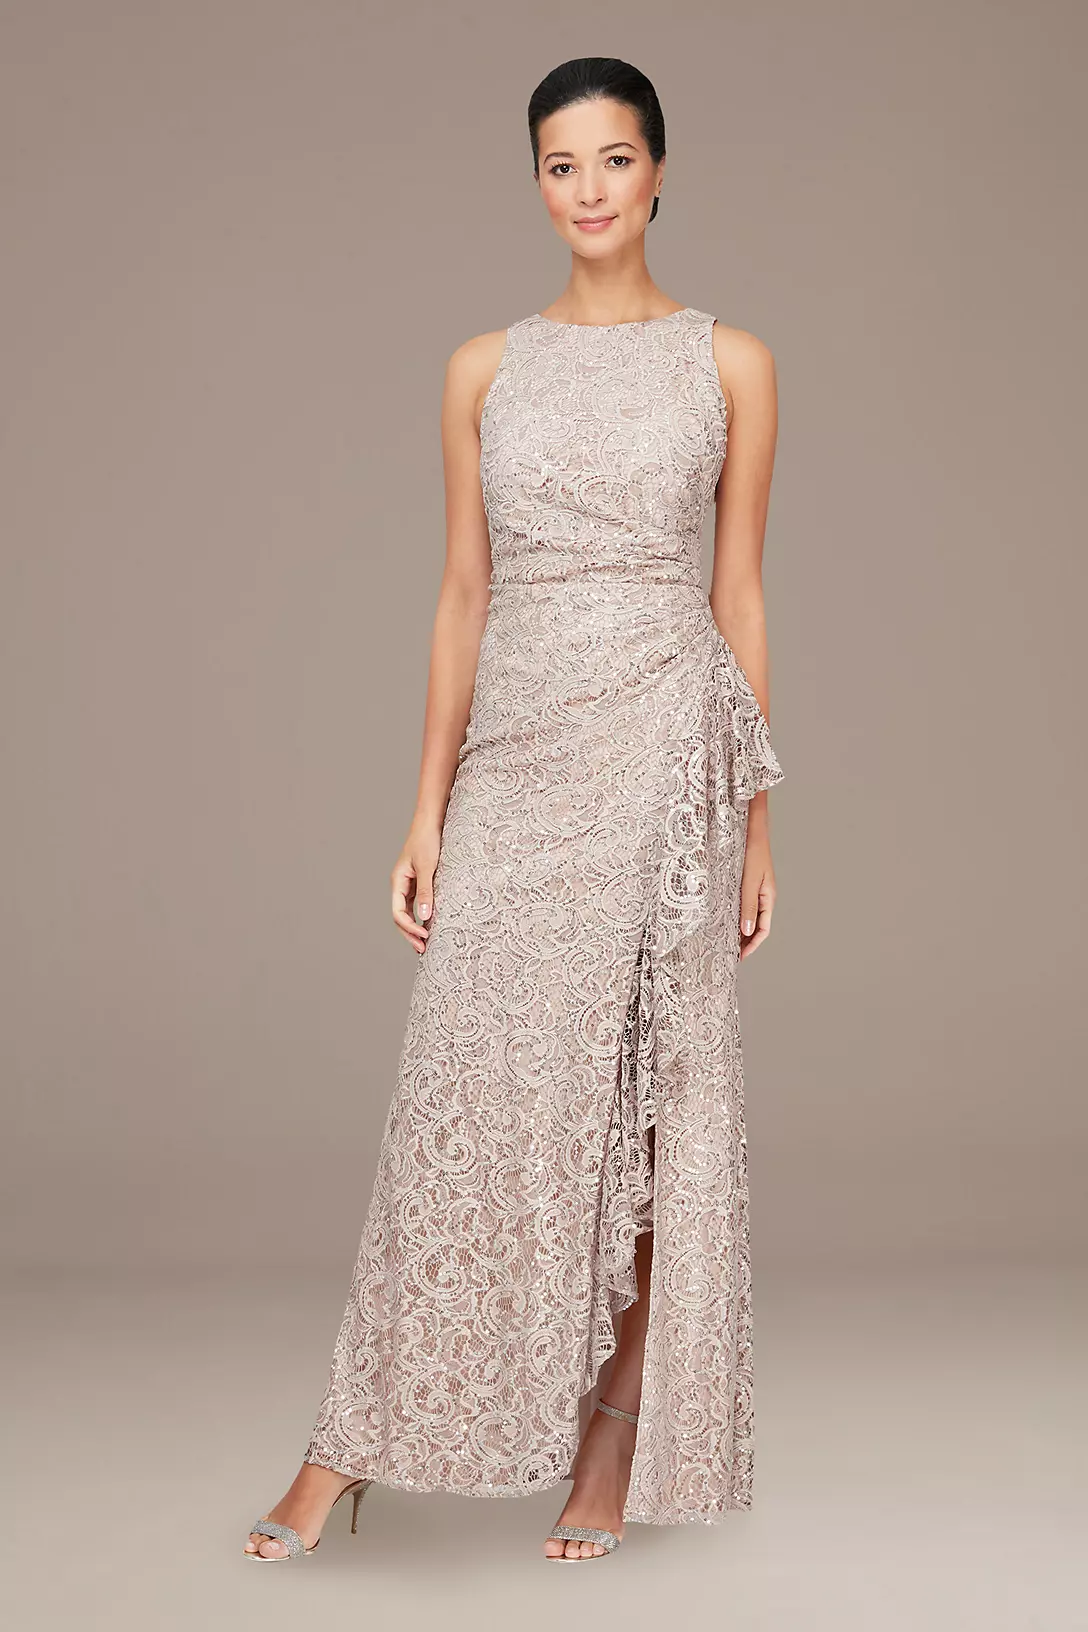 Glitter Lace Sheath Gown with Skirt Slit Image